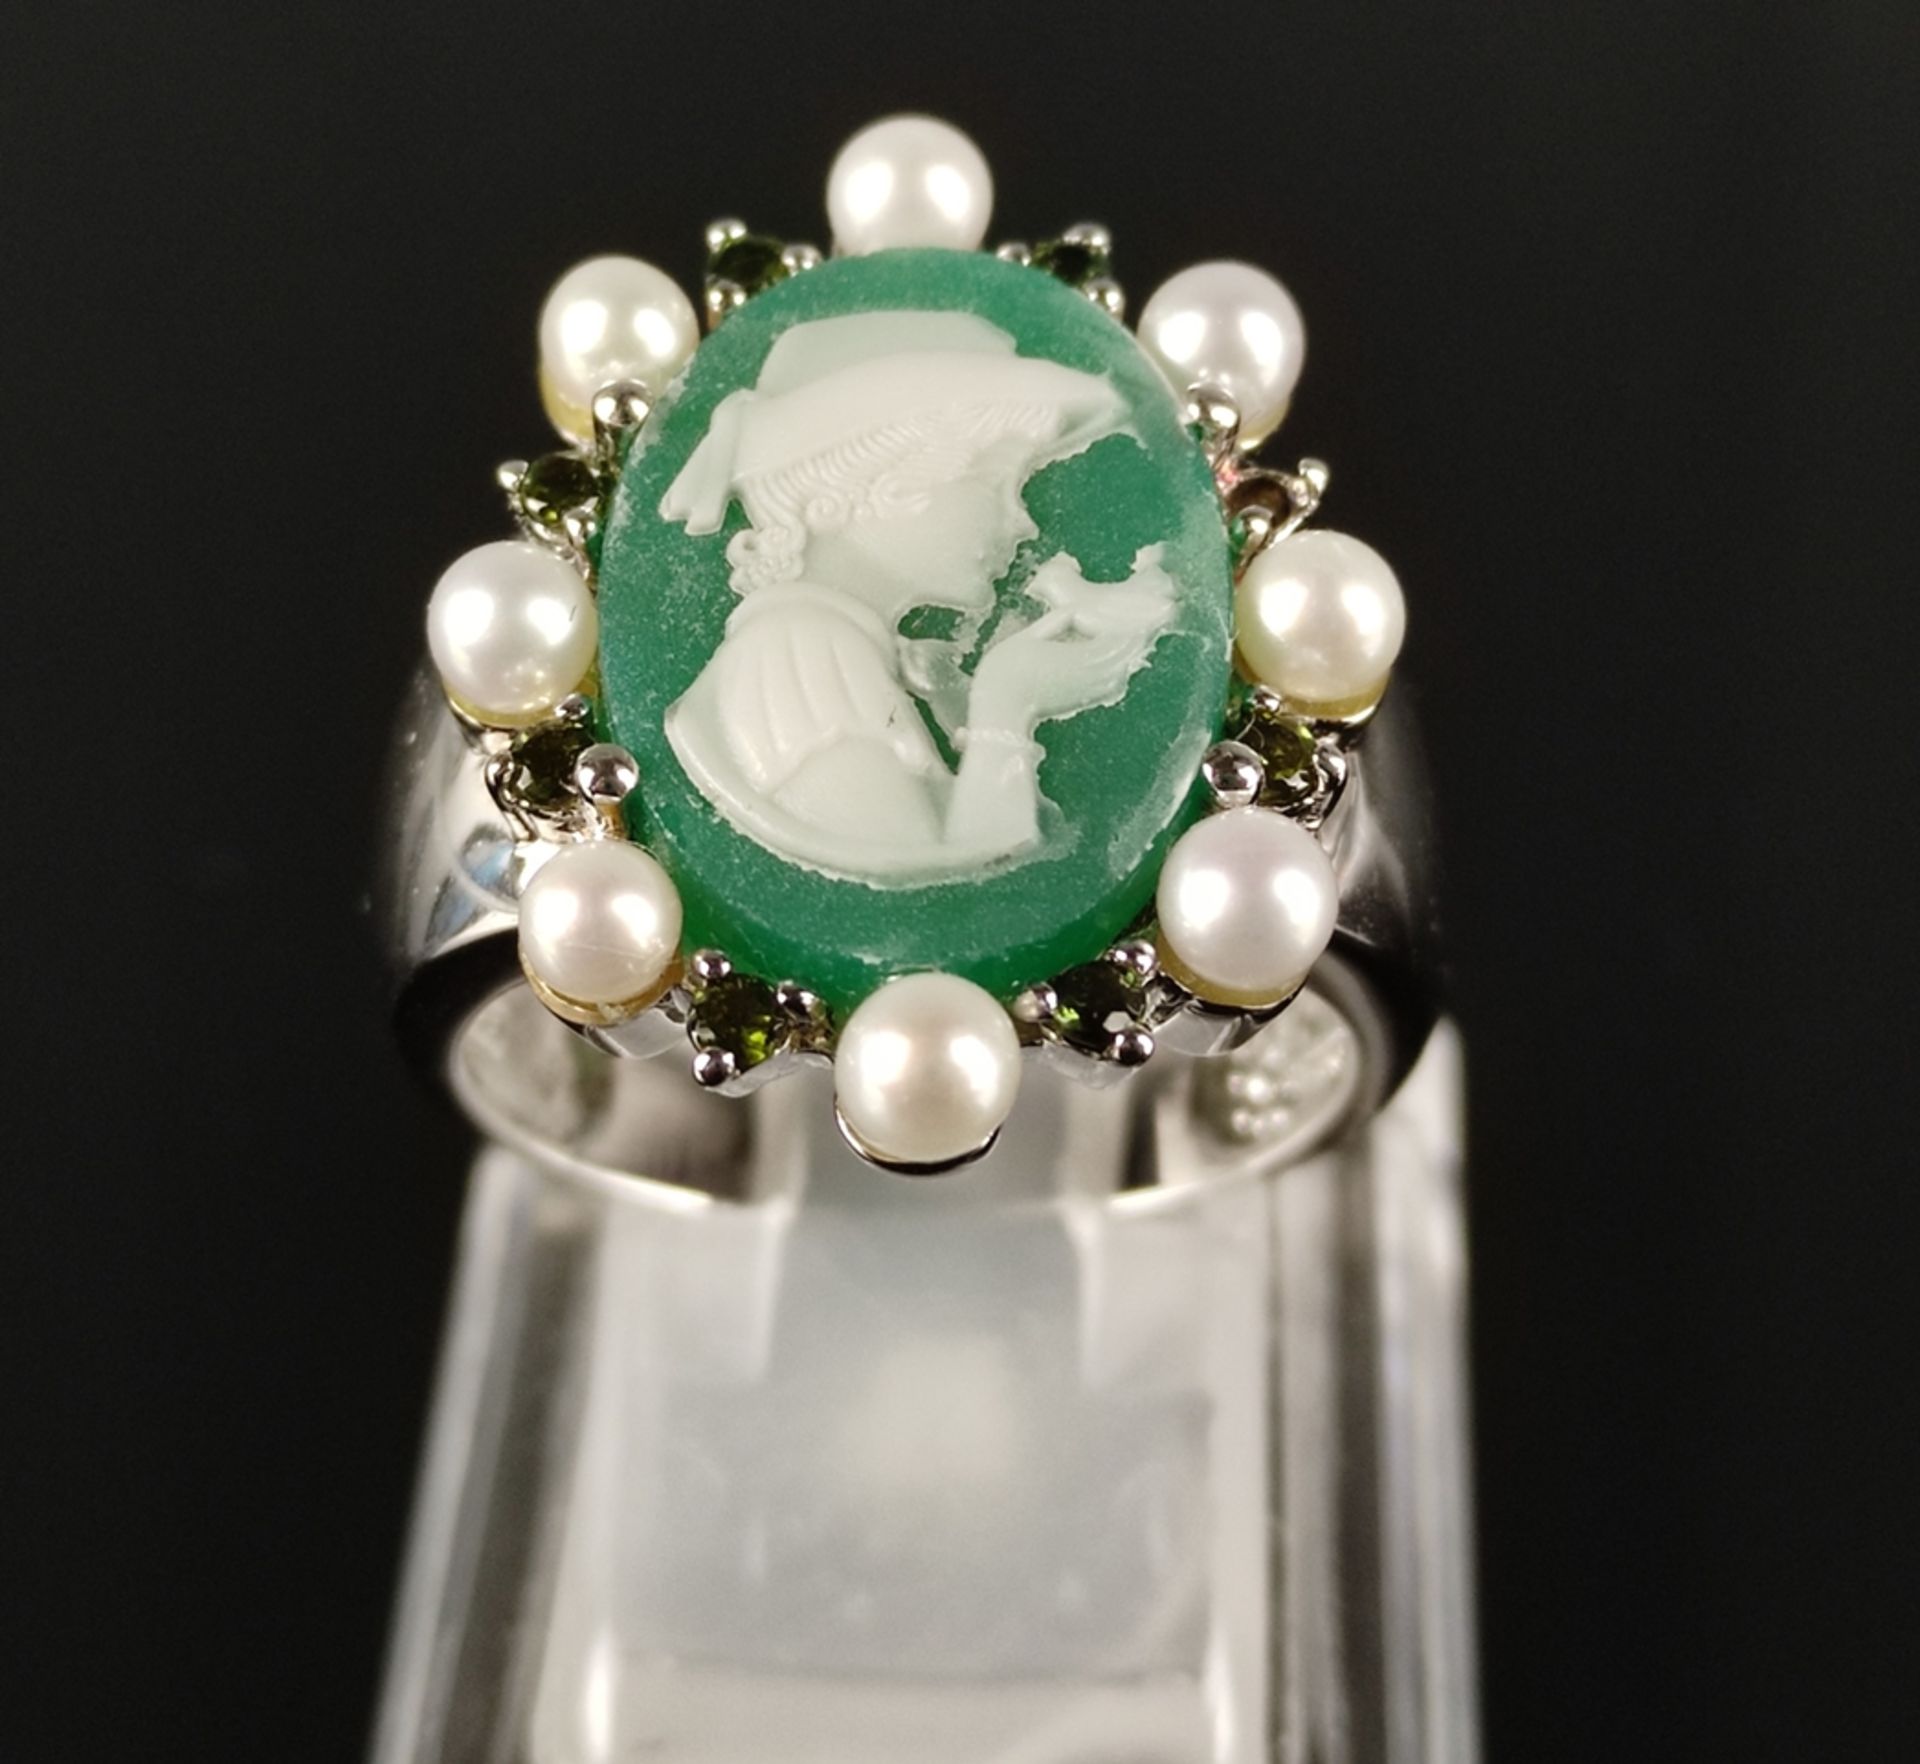 Agate cameo ring, ring head set with green agate, depicting a young woman with bird on her hand, su - Image 3 of 4